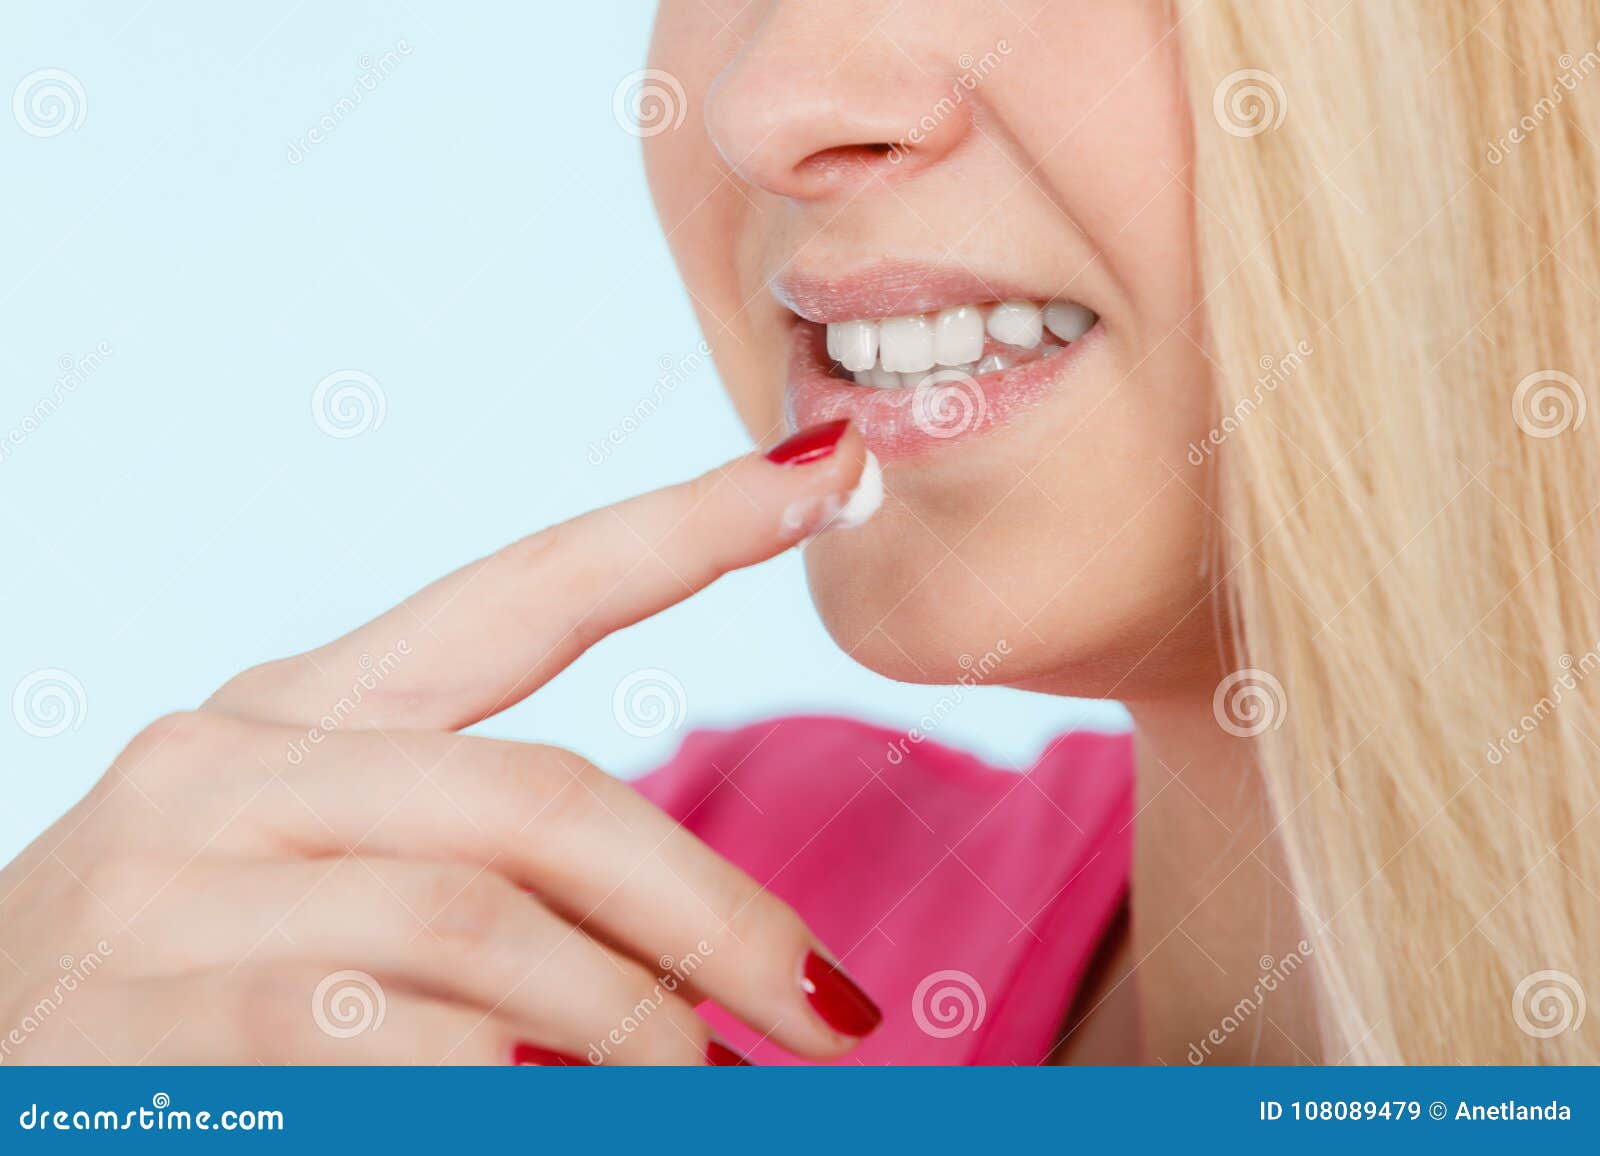 Licking Whipped Cream Stock Photos